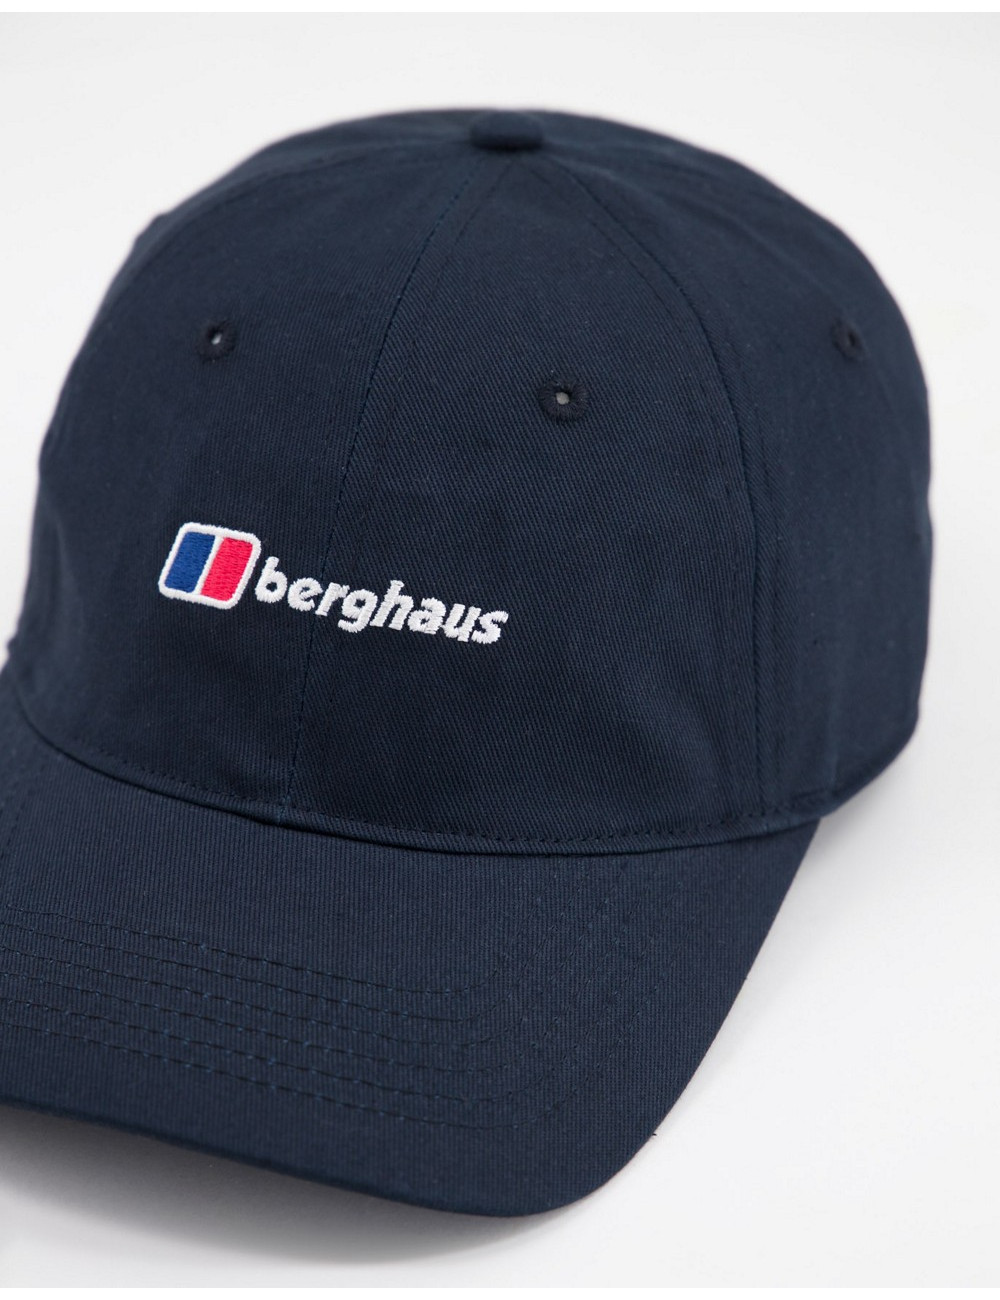 Berghaus Recognition cap in...